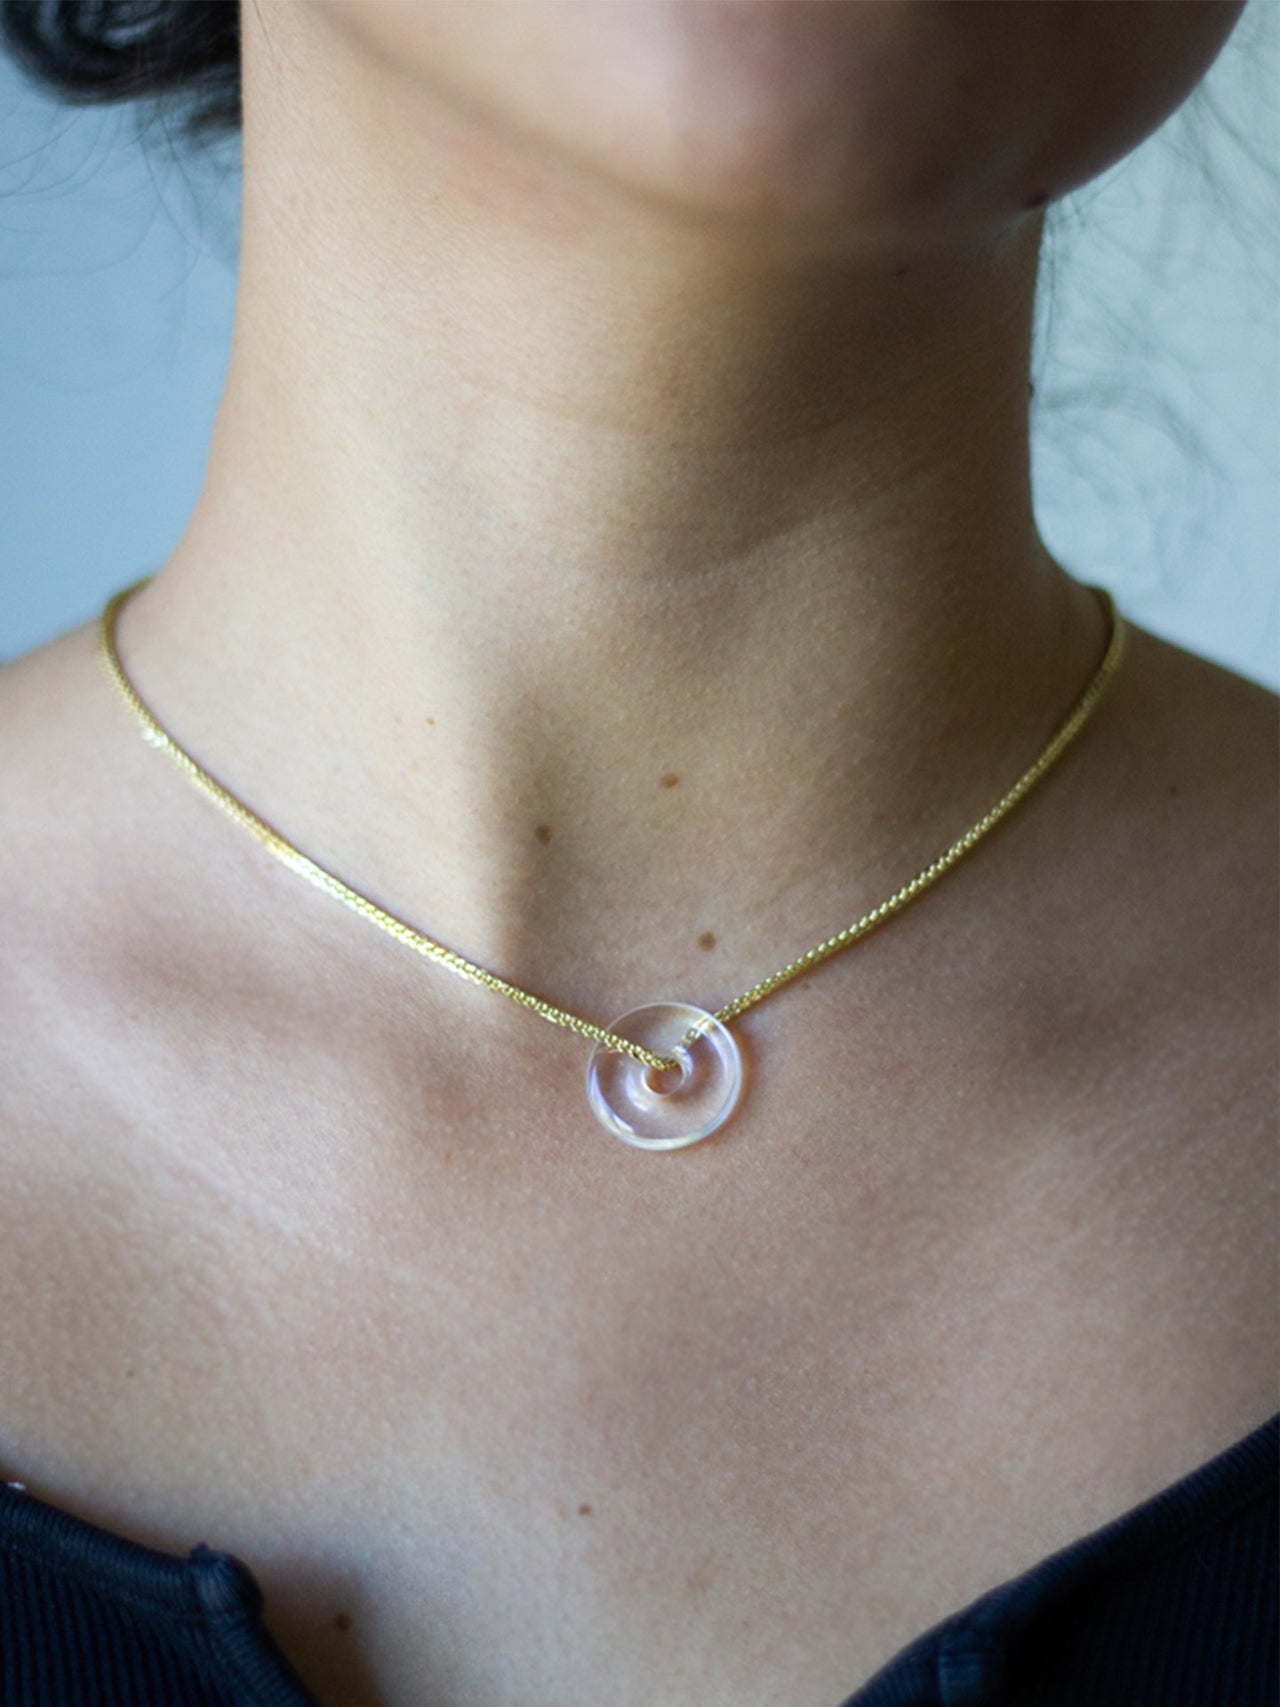 14kt Yellow Gold Square Wheat Chain & Quartz Pendant Necklace pictured on model.